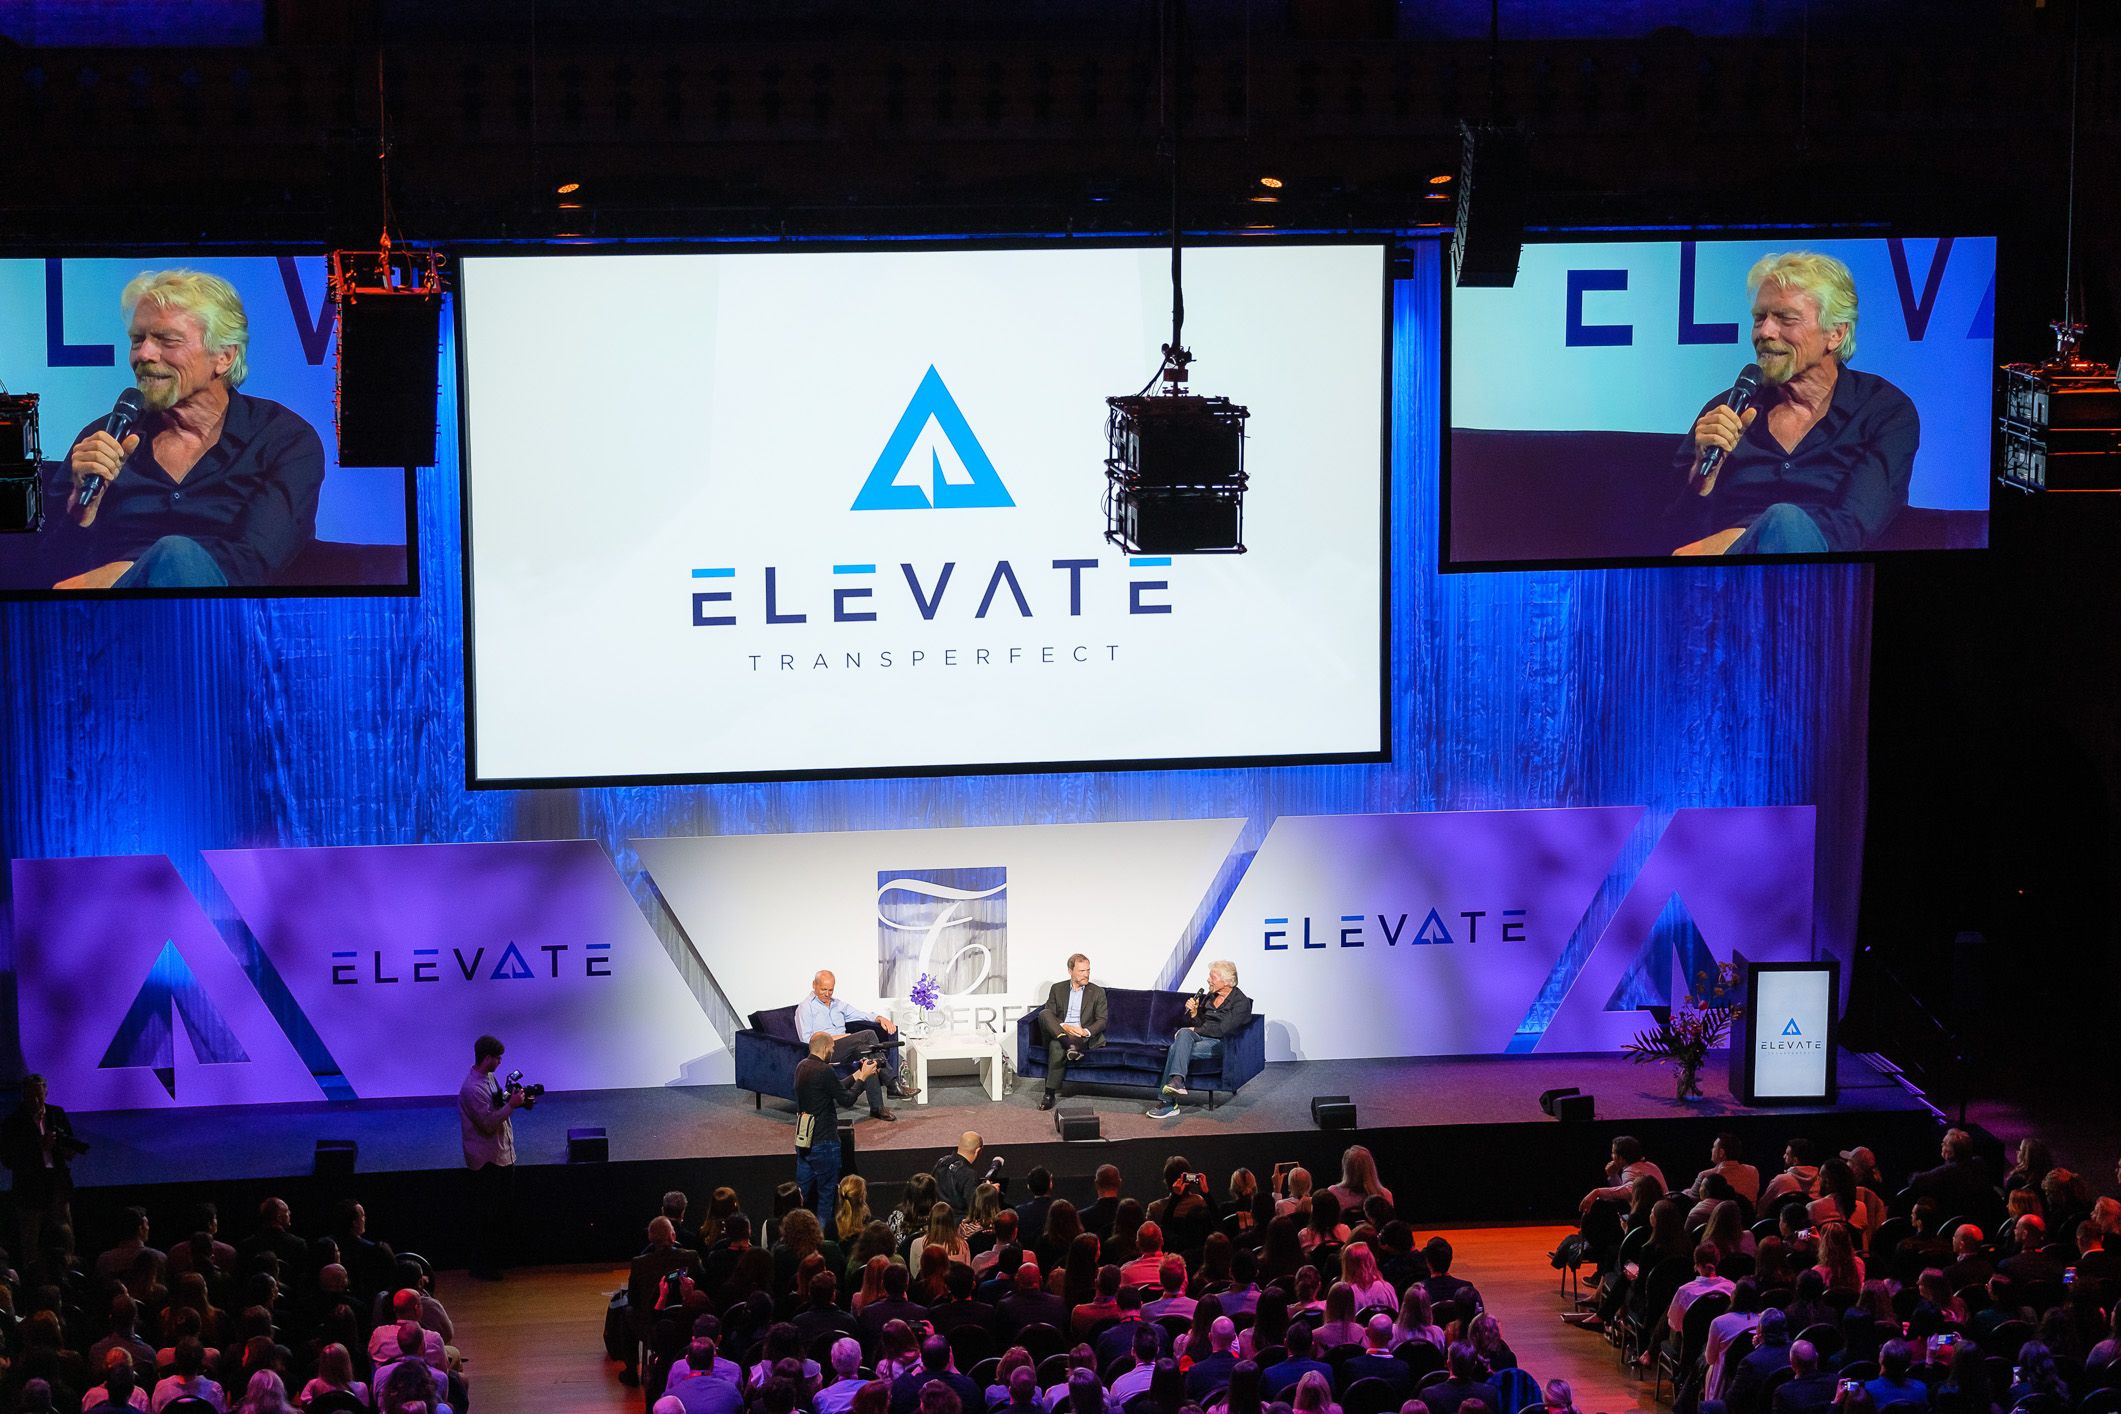 Sir Richard Branson speaks at TransPerfect’s ELEVATE conference in Amsterdam